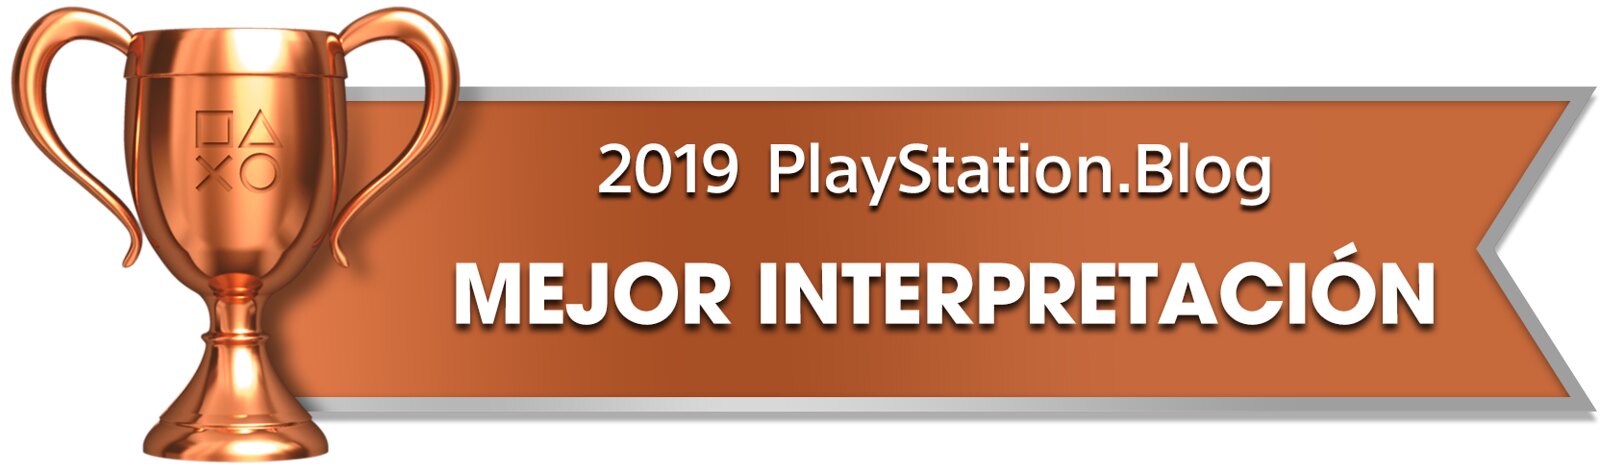 PS Blog Game of the Year 2019 - Best Performance - 4 - Bronze